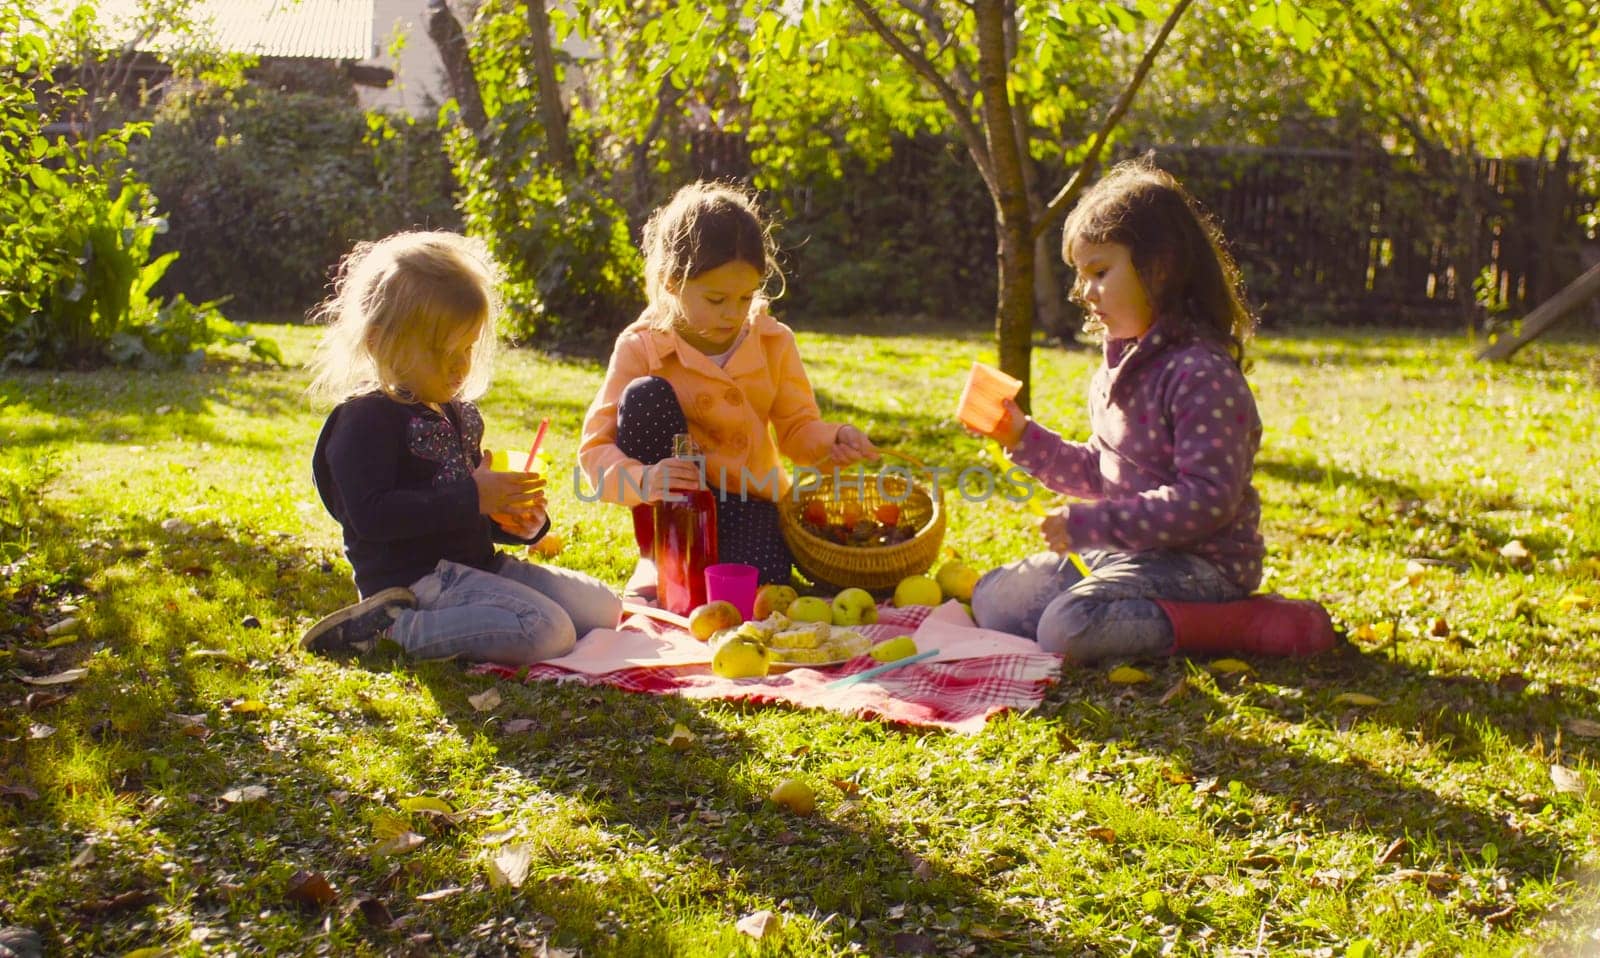 Autumn. Picnic in the garden. Children sitting on grass and drinking compote